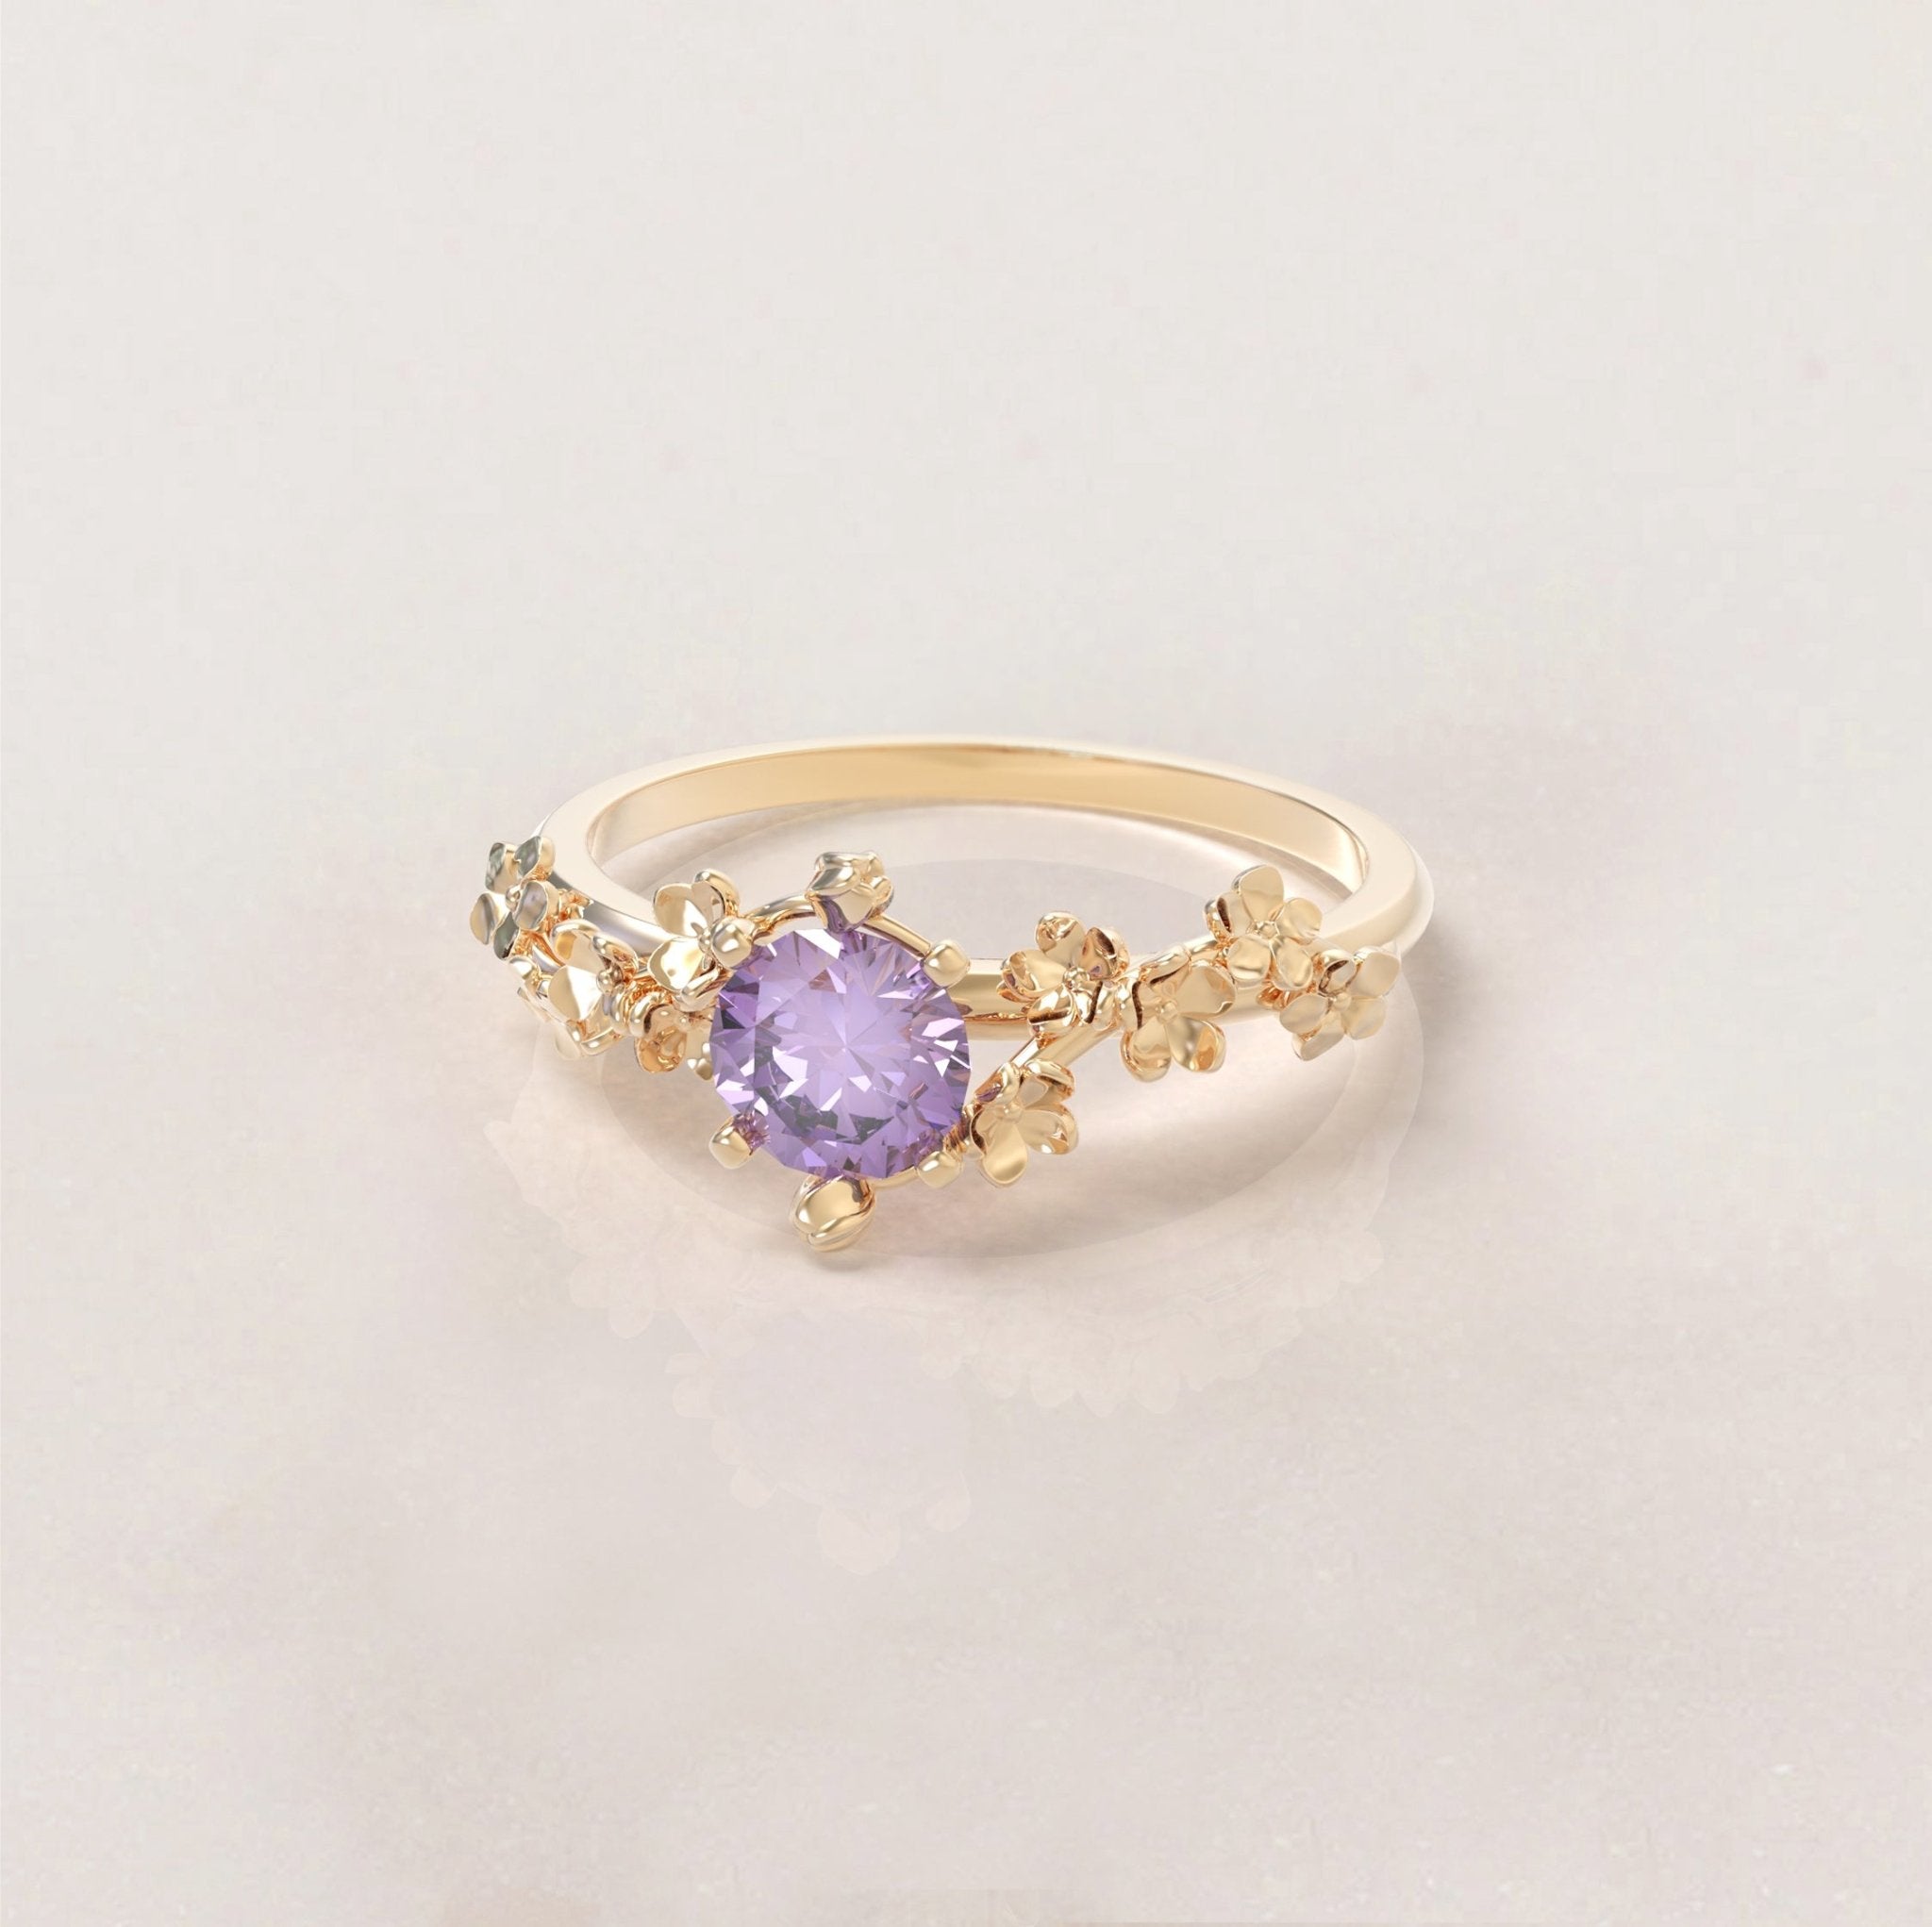 Unique Flowers Engagement Ring No.6 Version 2 in Yellow Gold - Amethyst - Roelavi